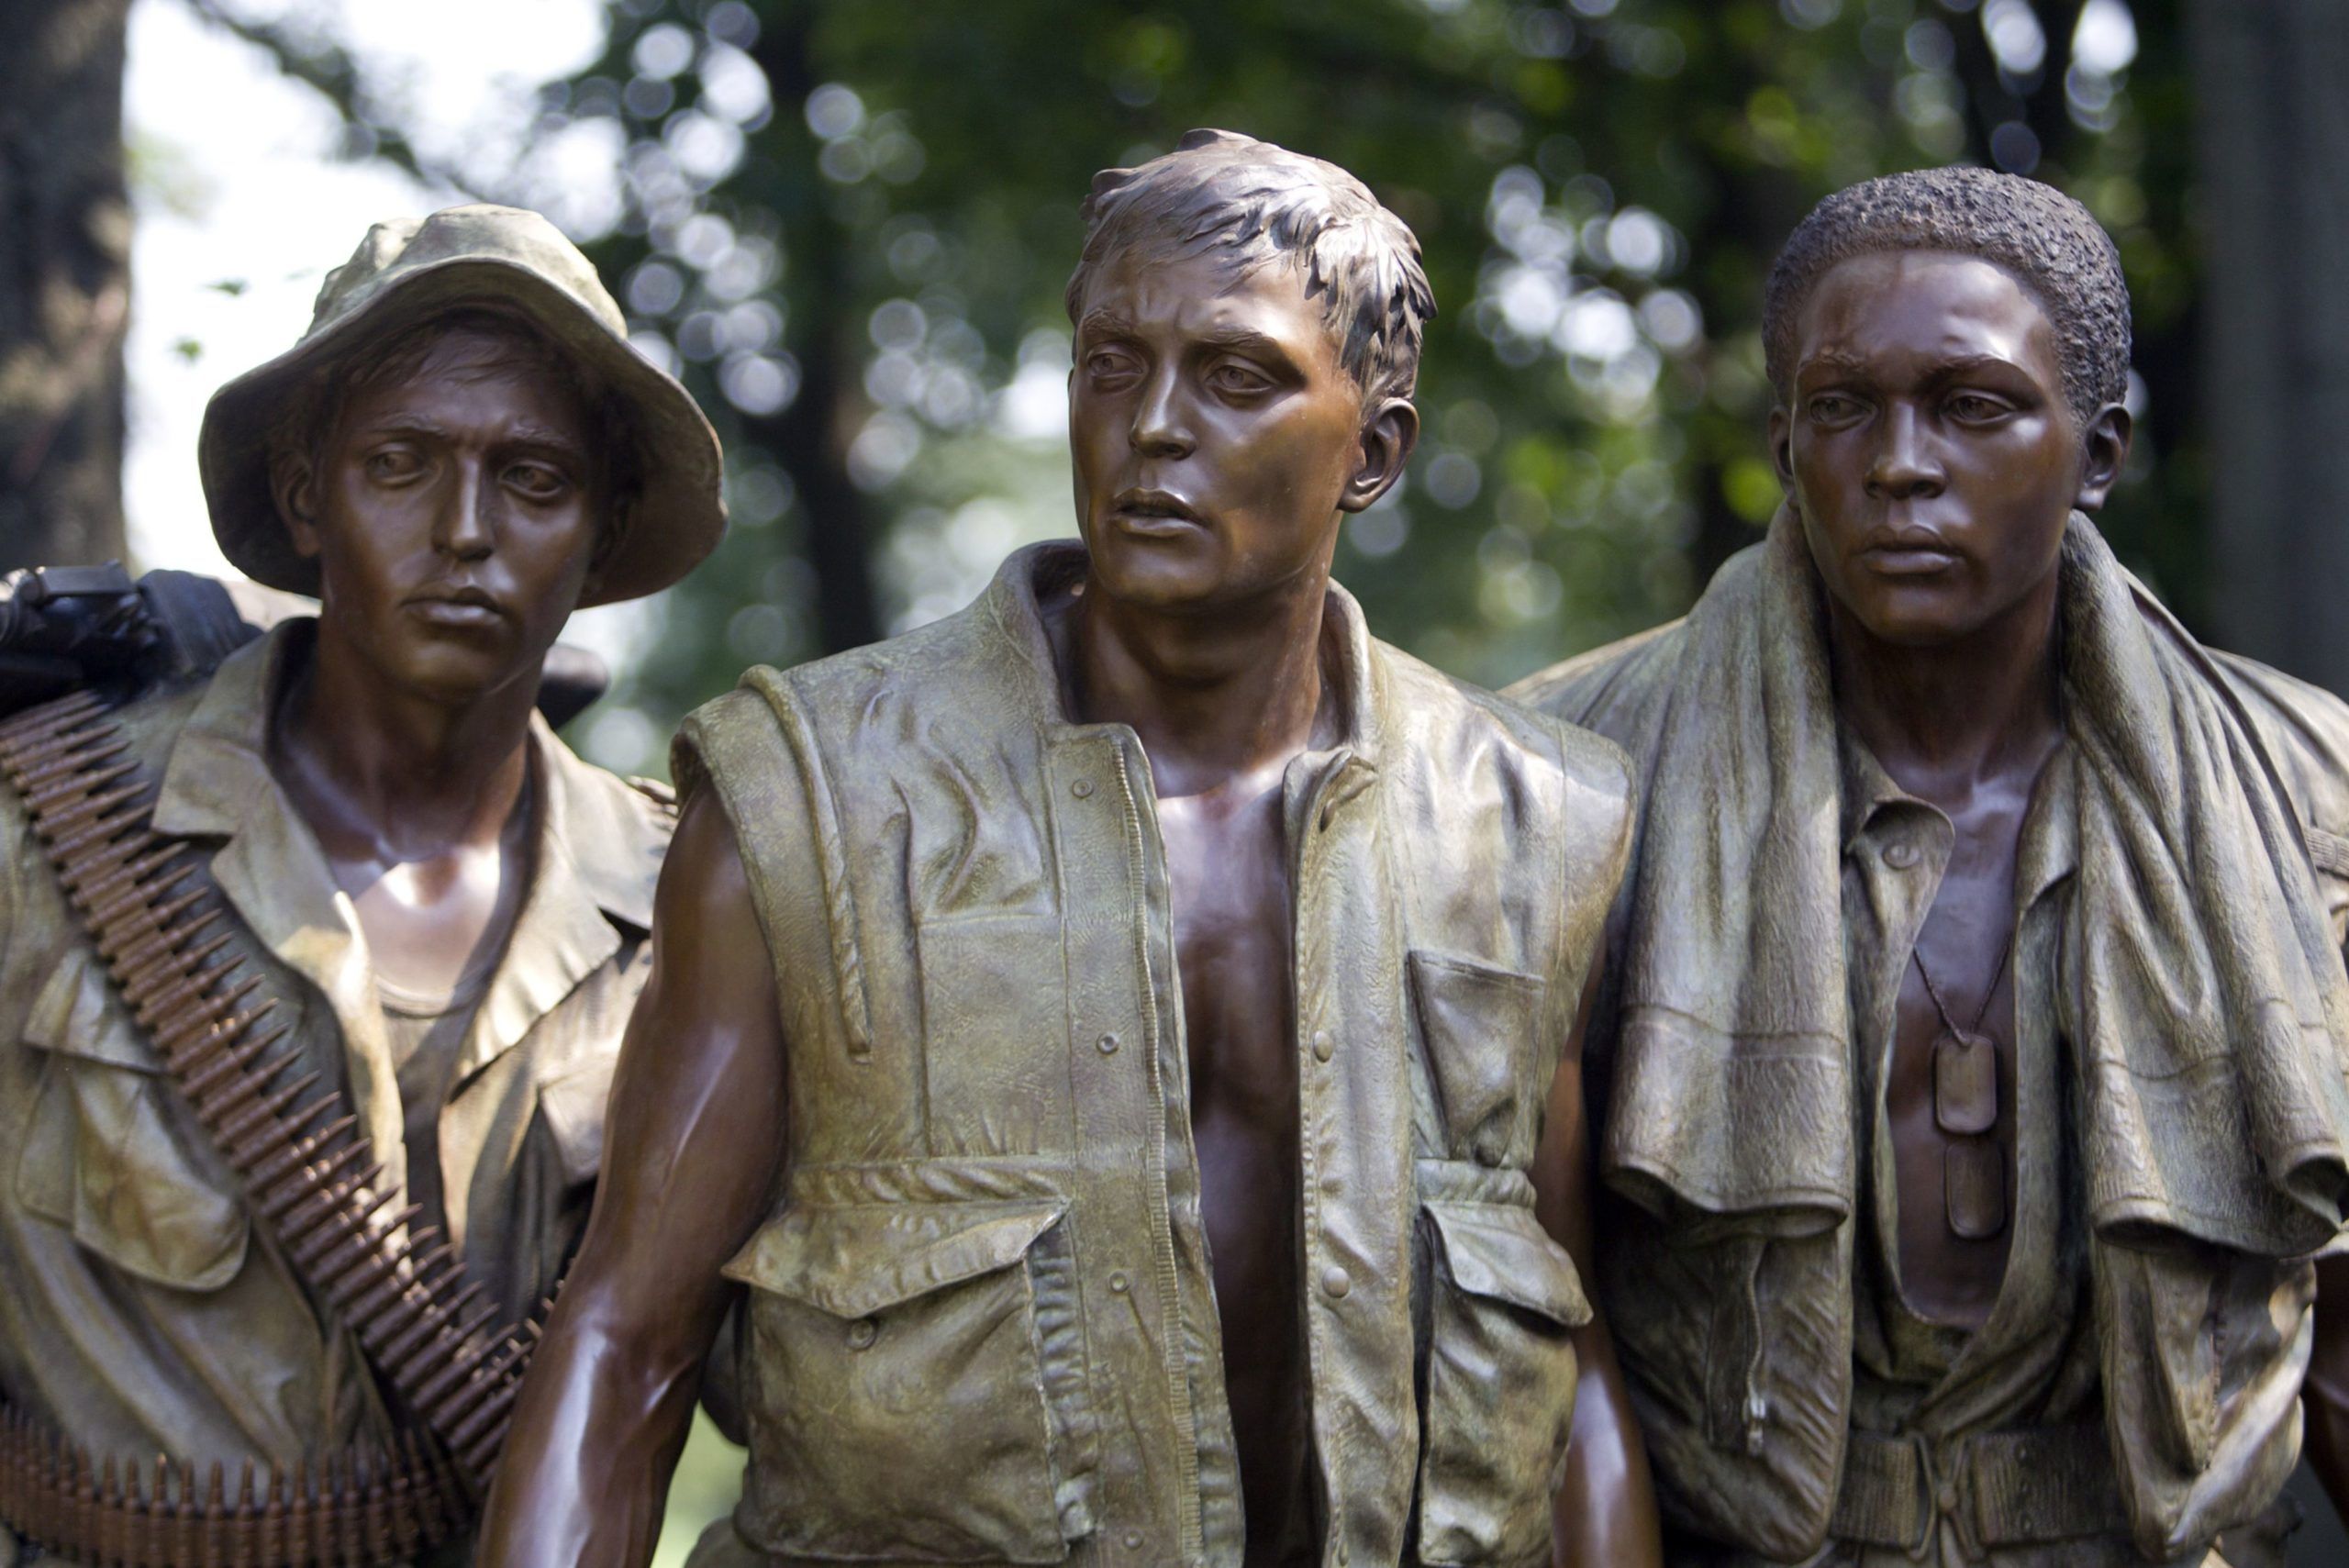 The Three Soldiers bronze memorial statue commemorating the Vietnam War stands in Washington, D.C., U.S., on Friday, Aug. 20, 2010. The House and Senate will reconvene after their recess on Sept. 13. Photographer: Andrew Harrer/Bloomberg